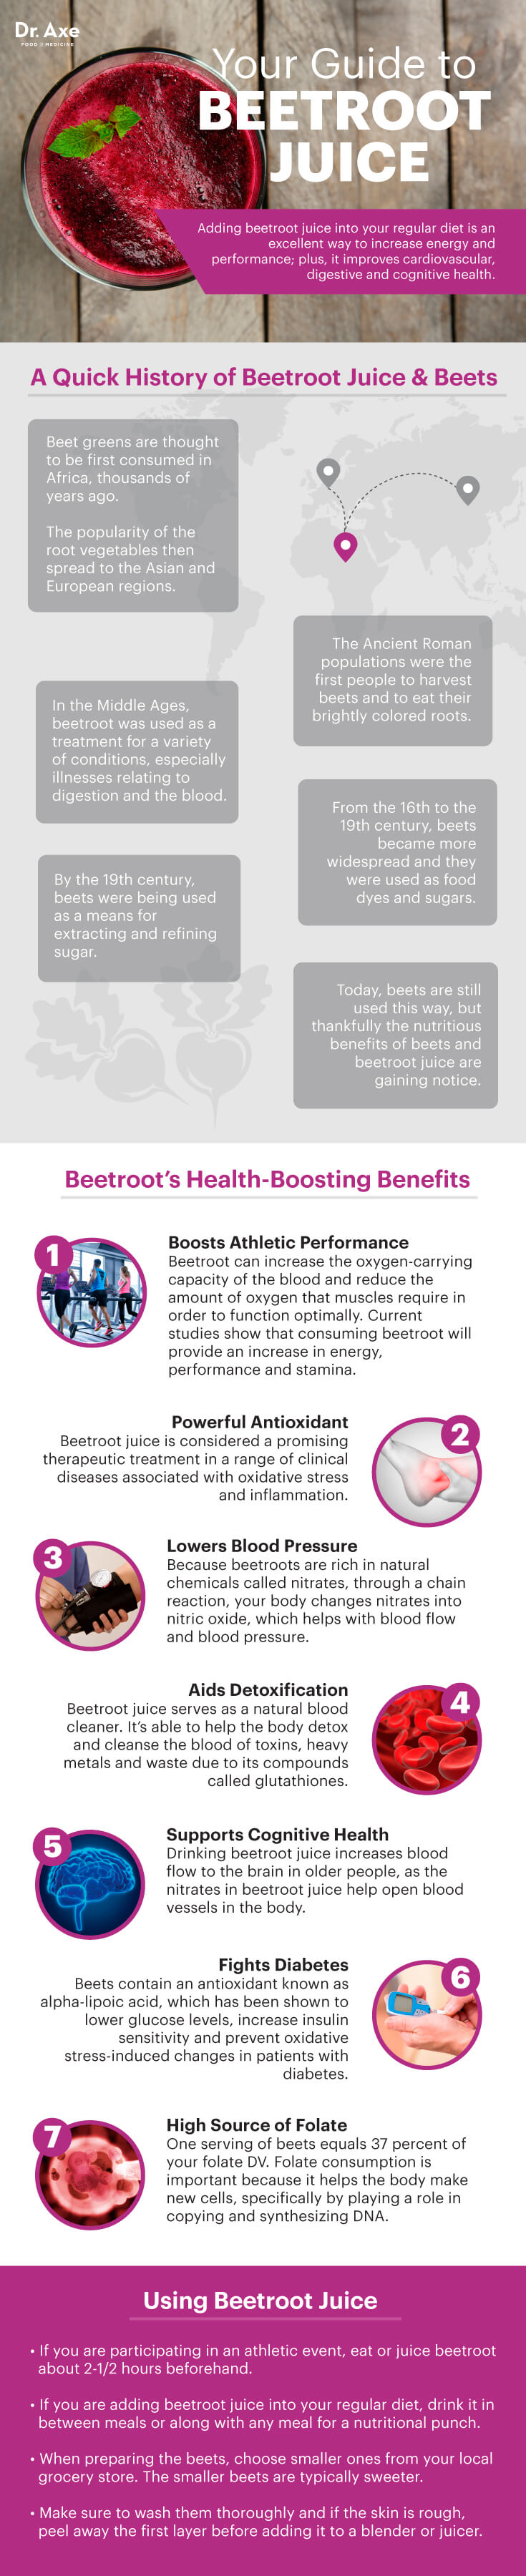 Beetroot juice guide - Dr. Axe